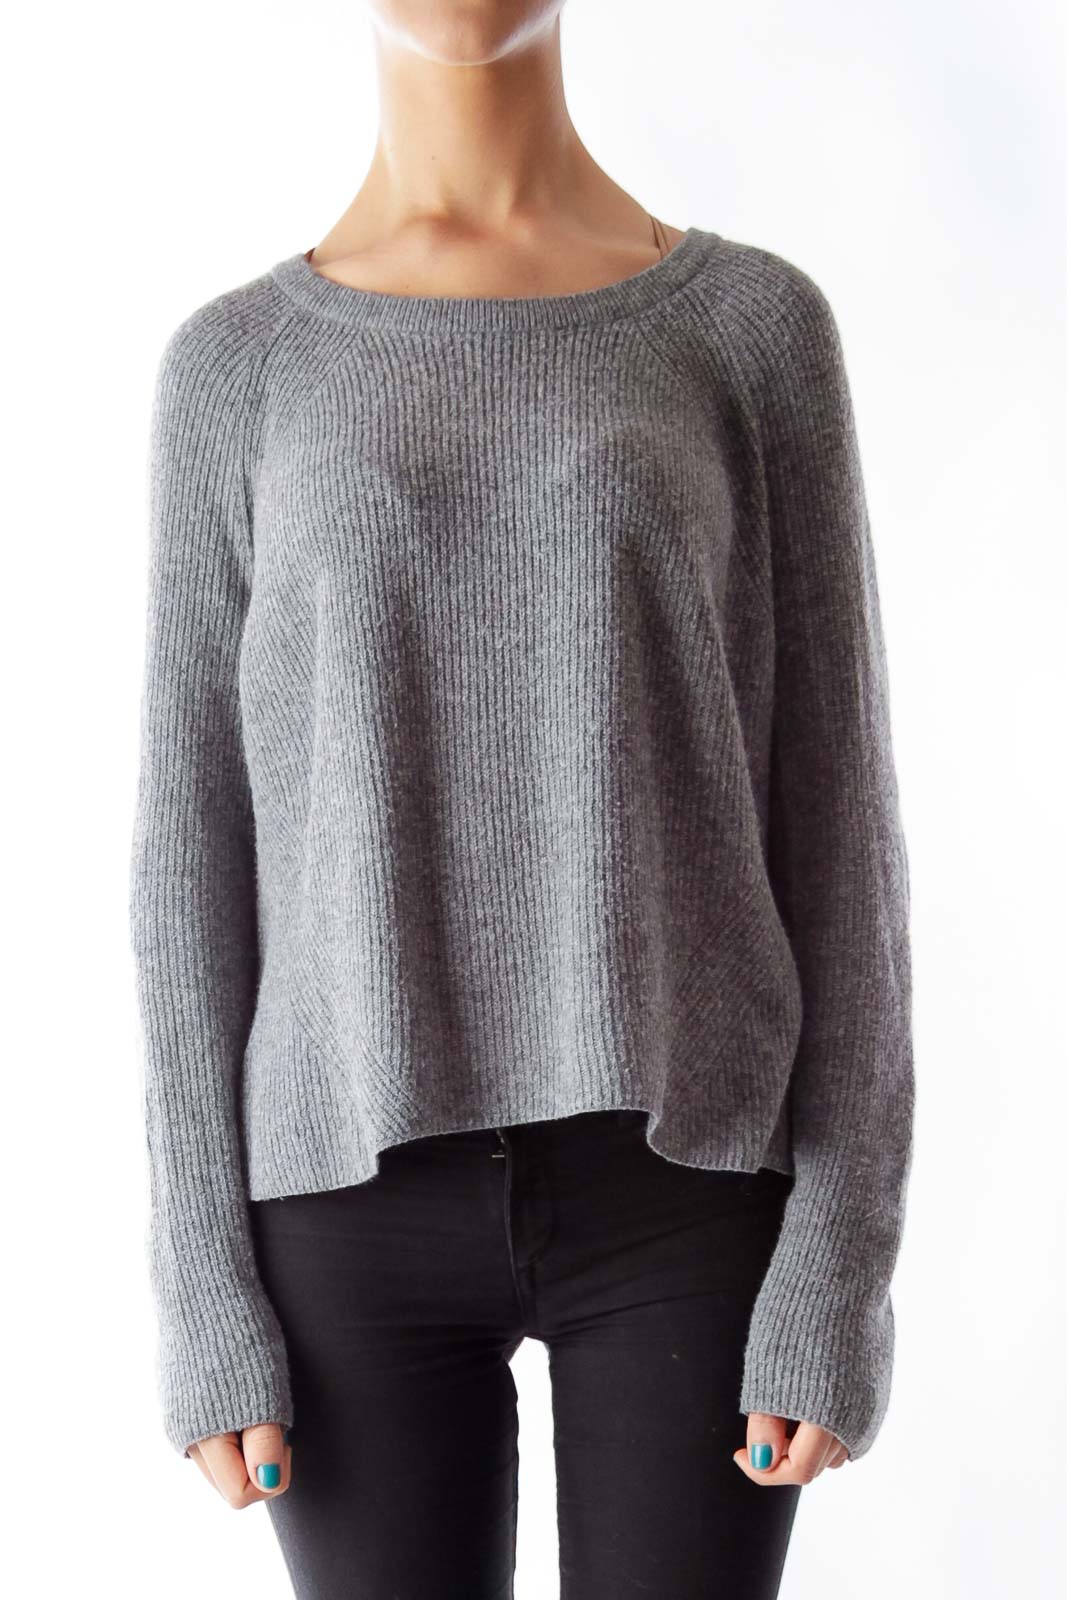 Gray Crop Sweater Front